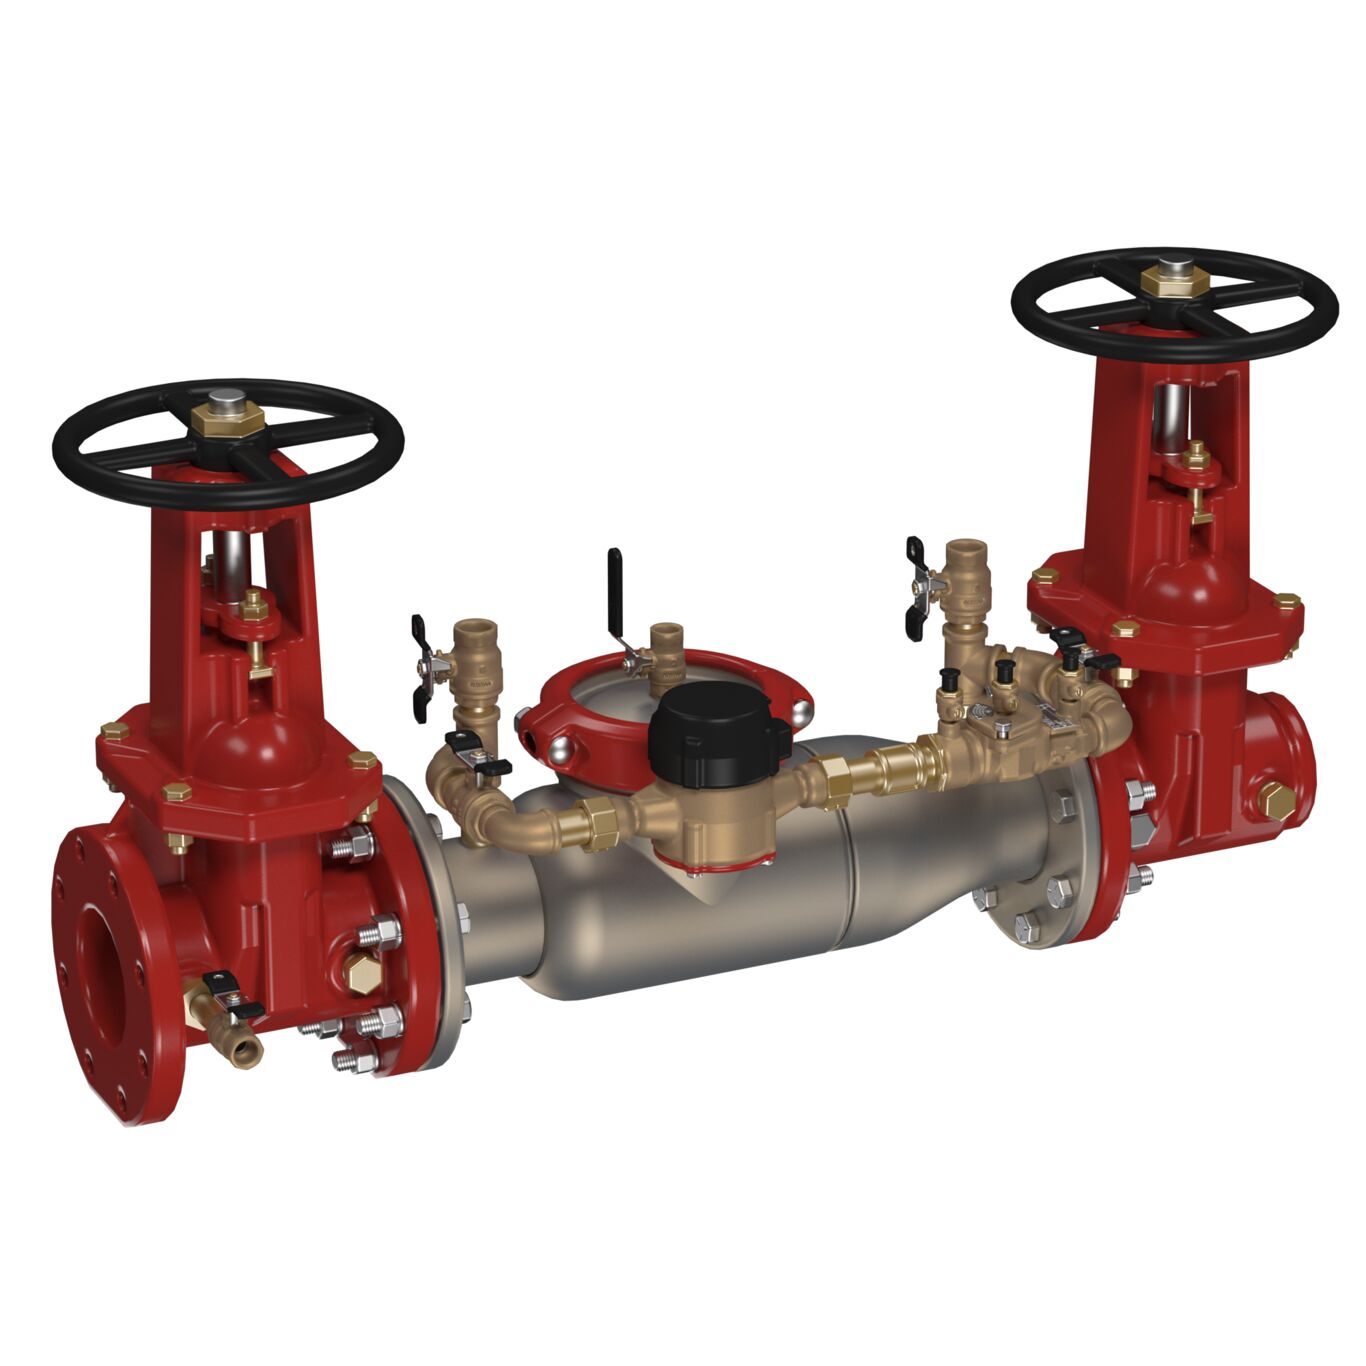 Product Image - Stainless Steel Double Check Detector Assembly Backflow Preventer, OSY Shutoffs, Flanged Inlet x Grooved Outlet, Meter, Short Lay Length